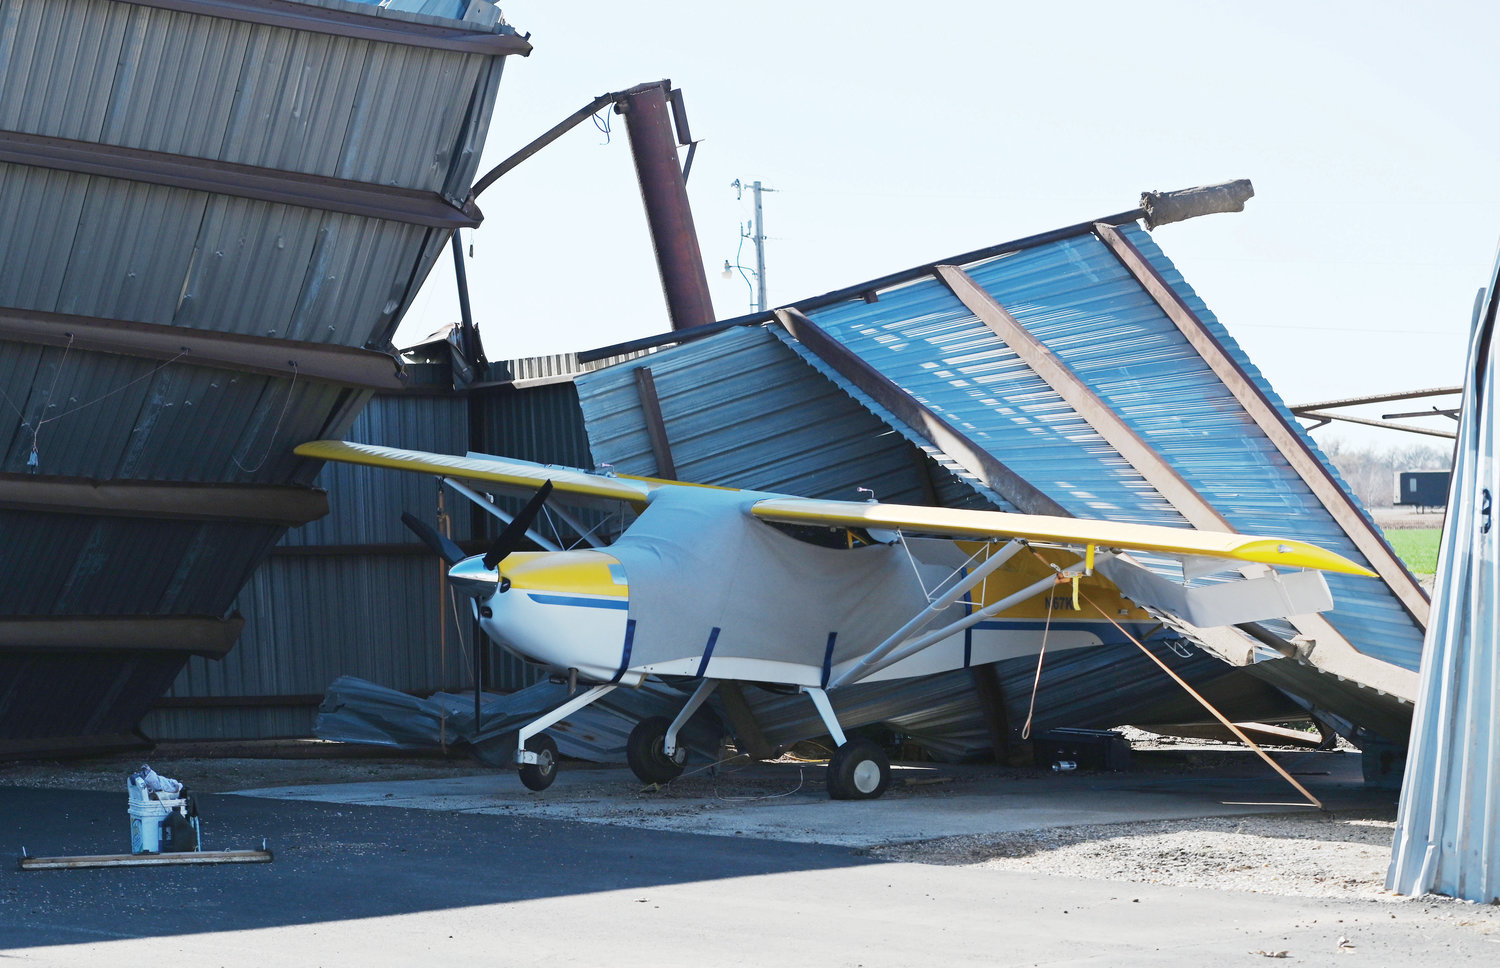 One of the 15 airplanes at the David J. Perry Airport in Goldsby that sustained damage from Sunday’s EF2 tornado.